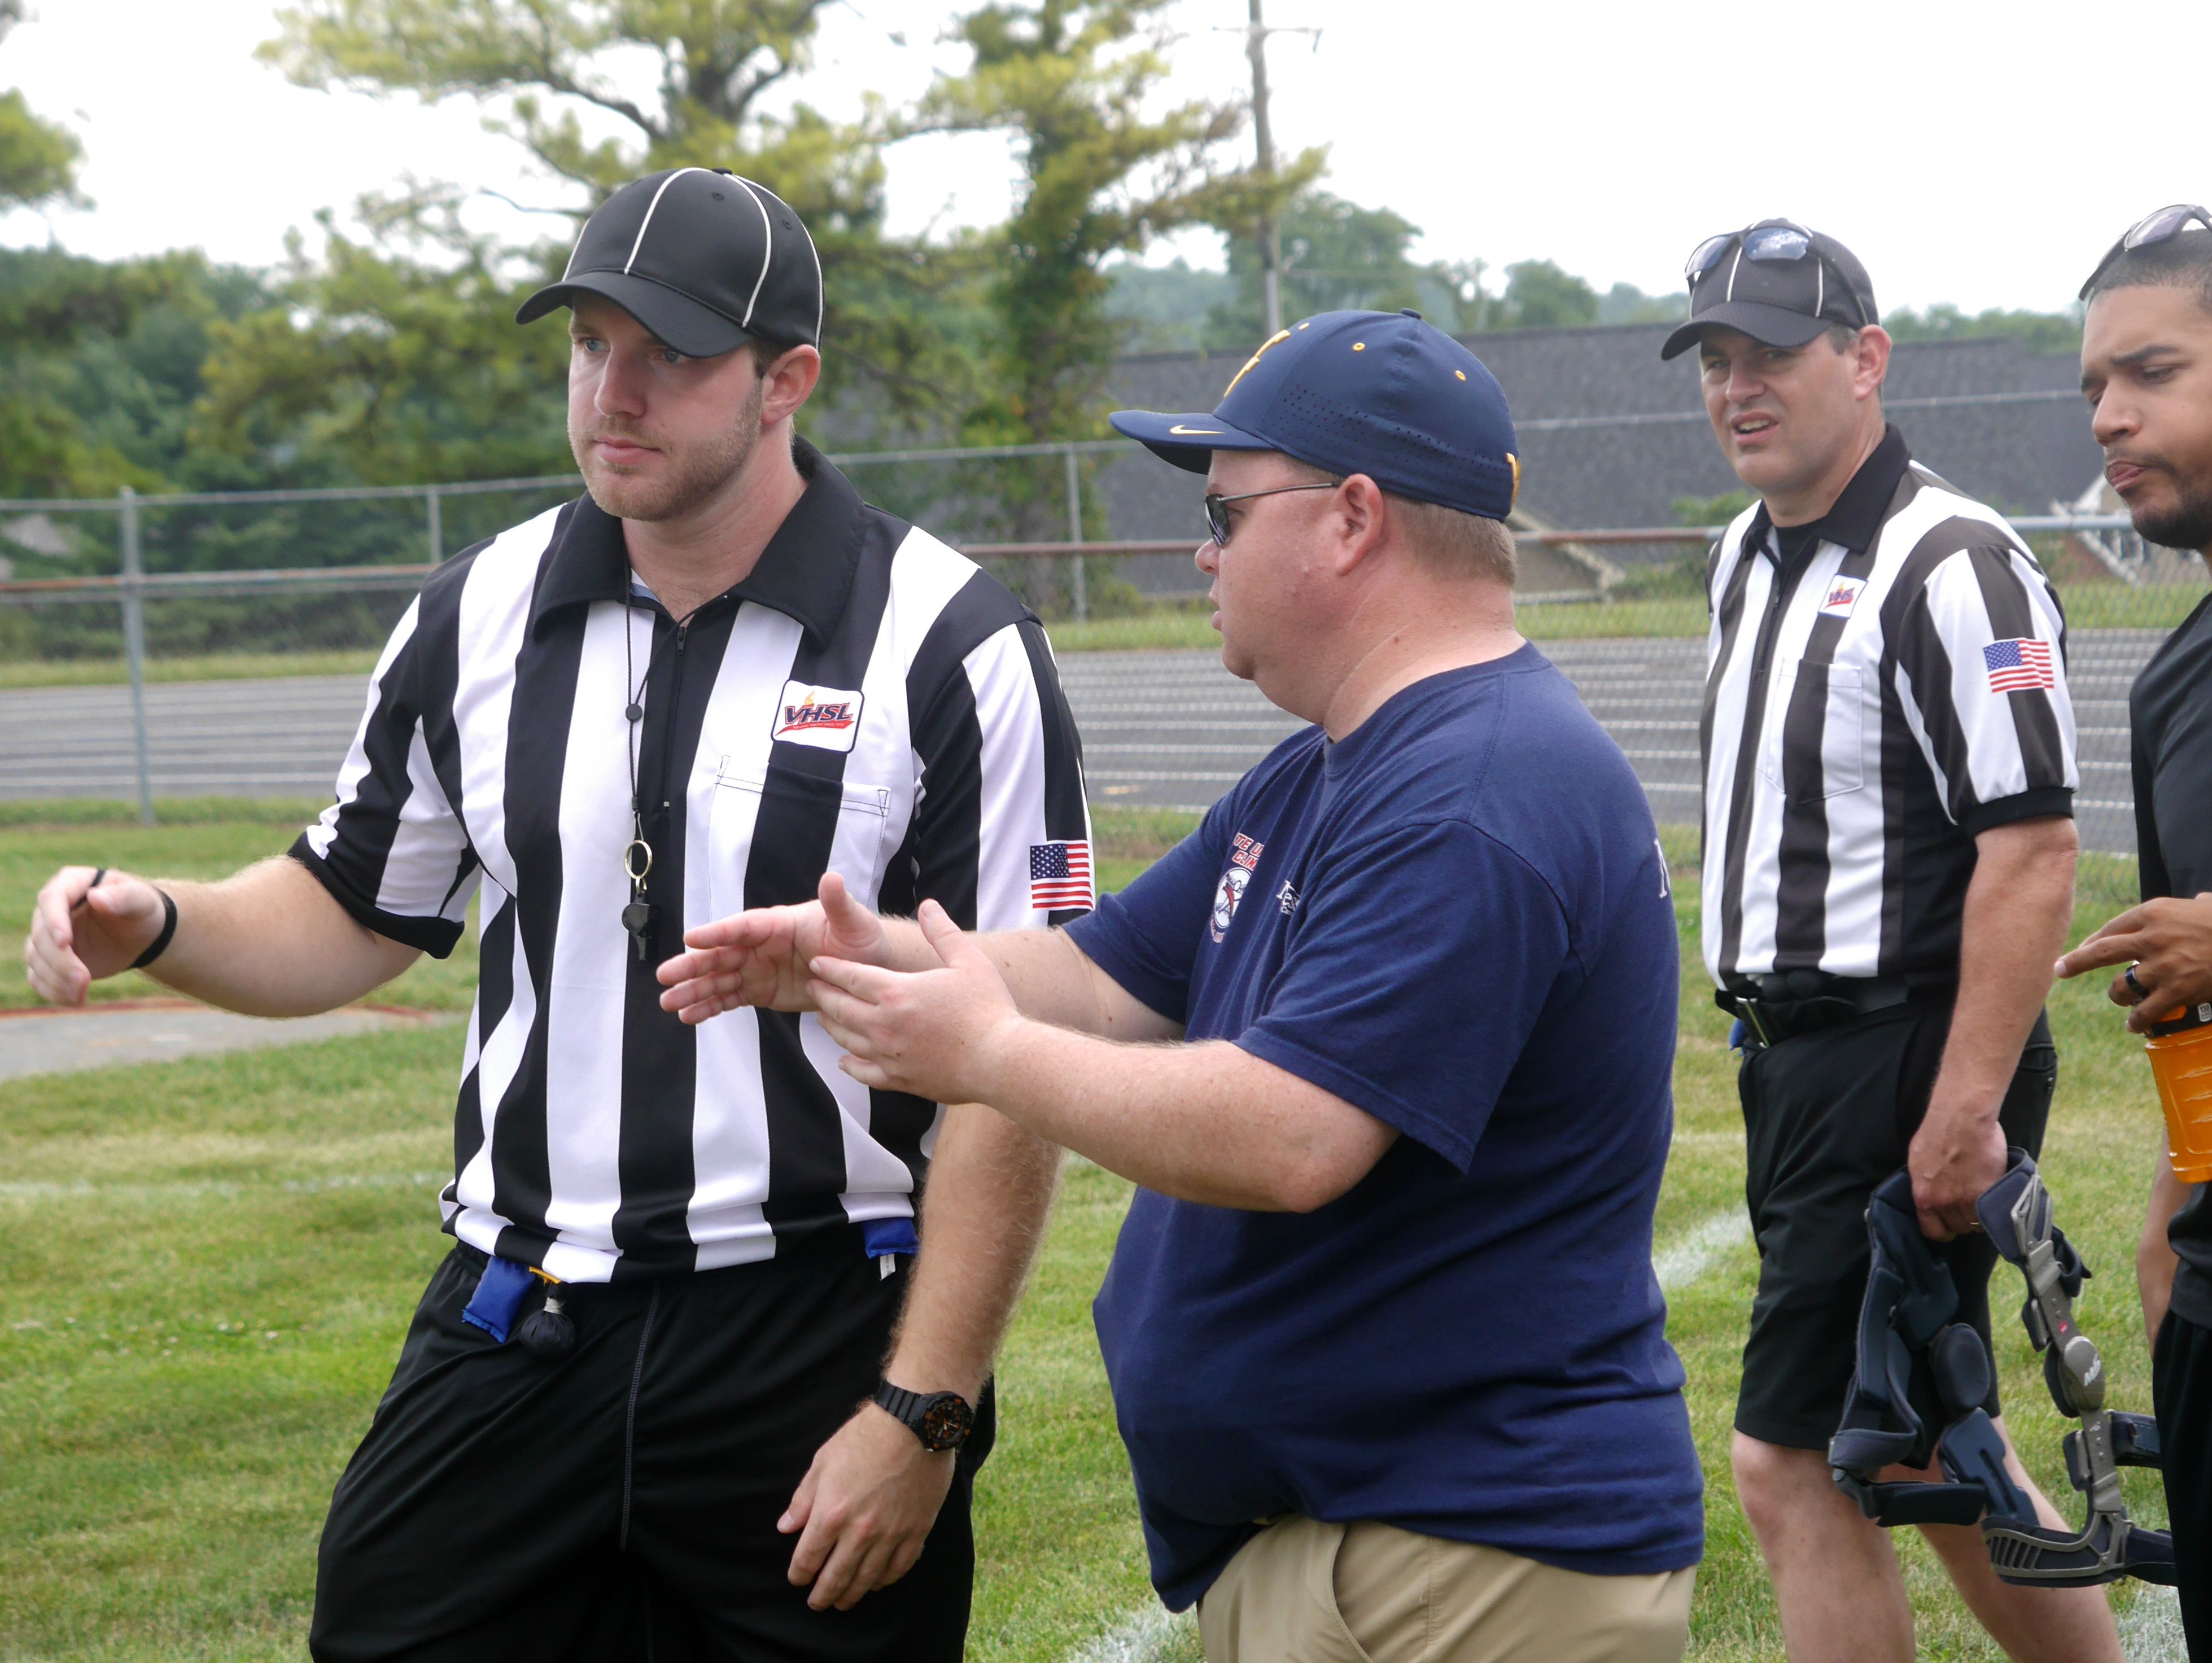 The players weren't the only ones using the Fort Defiance vs James River scrimmage to tune-up for the high school football season, first-year referee Daniel Roquemore of Staunton gets some advice from PVFOA commissioner Dave Moore during the Riverheads High School 2016 football jamboree on Aug. 20, 2016.